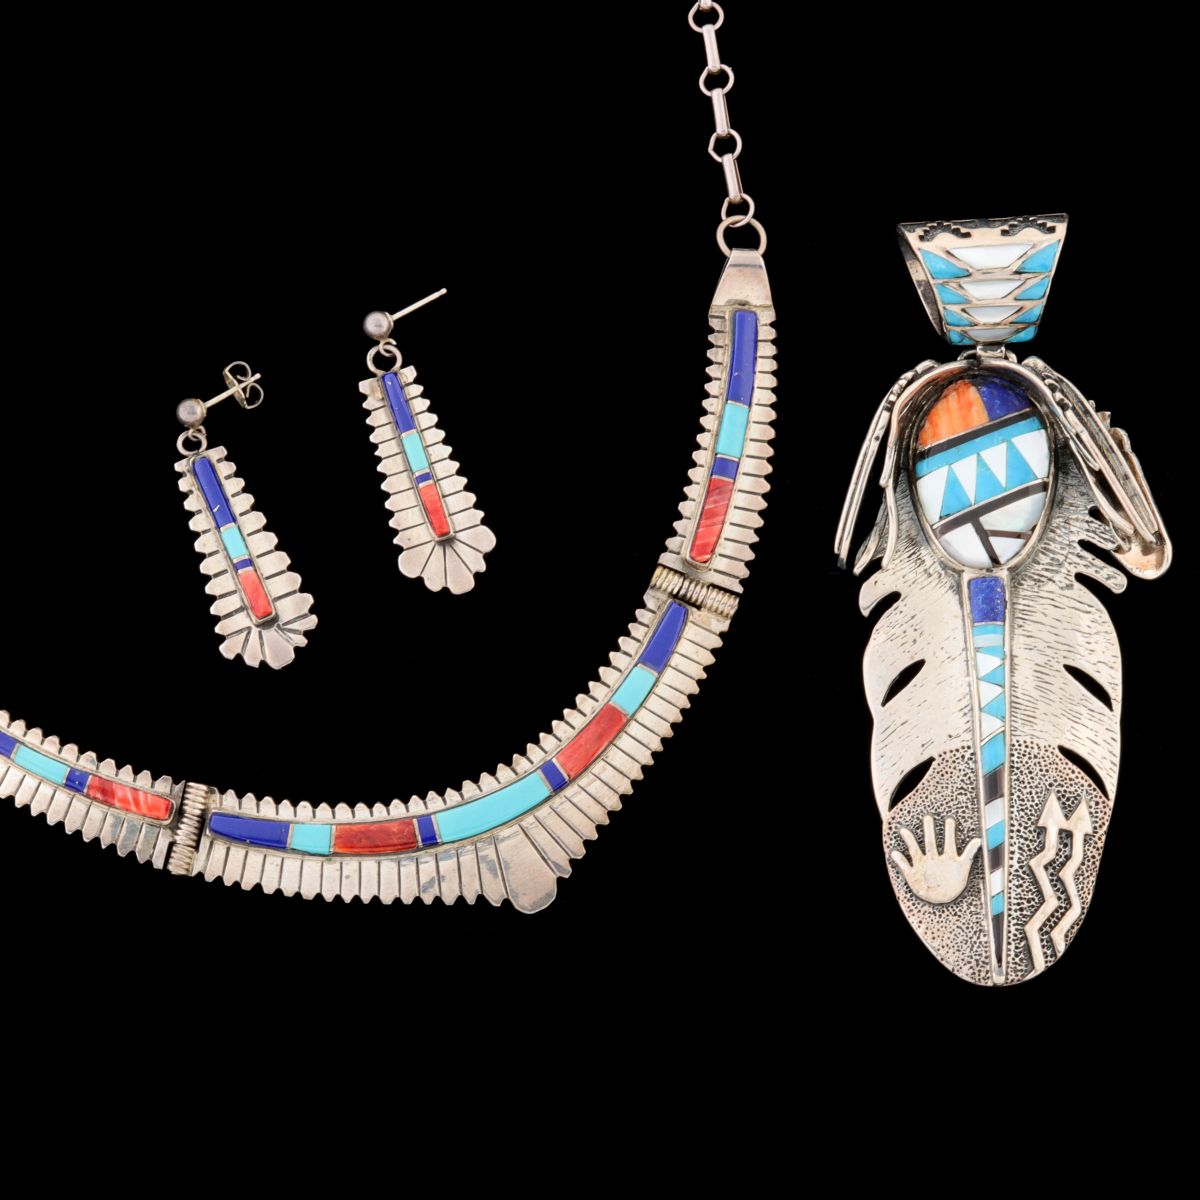 FAY BOYD AND OTHER INLAID STERLING NAVAJO JEWELRY